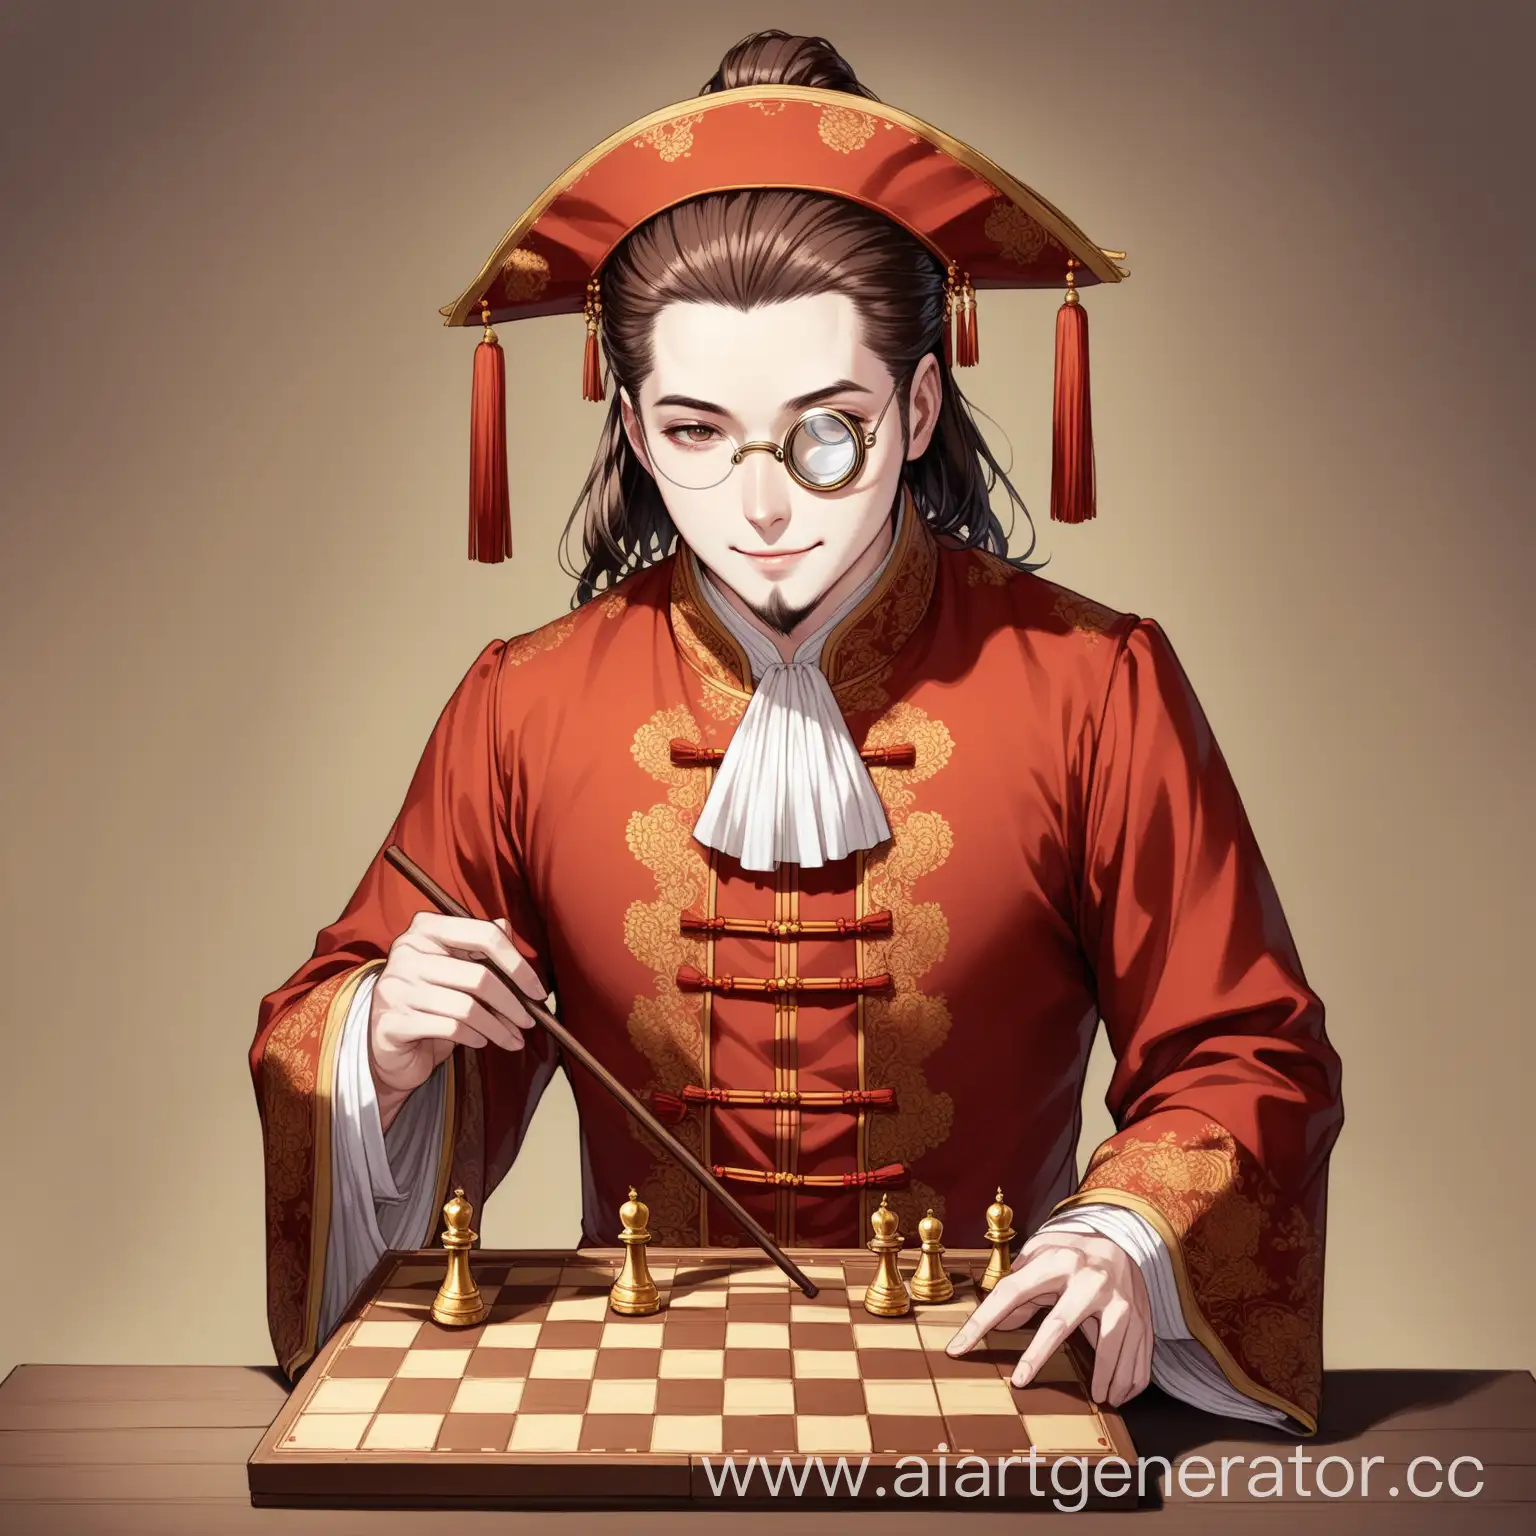 Mysterious-Gentleman-in-18th-Century-Chinese-Attire-with-Chessboard-and-Unusual-Cane